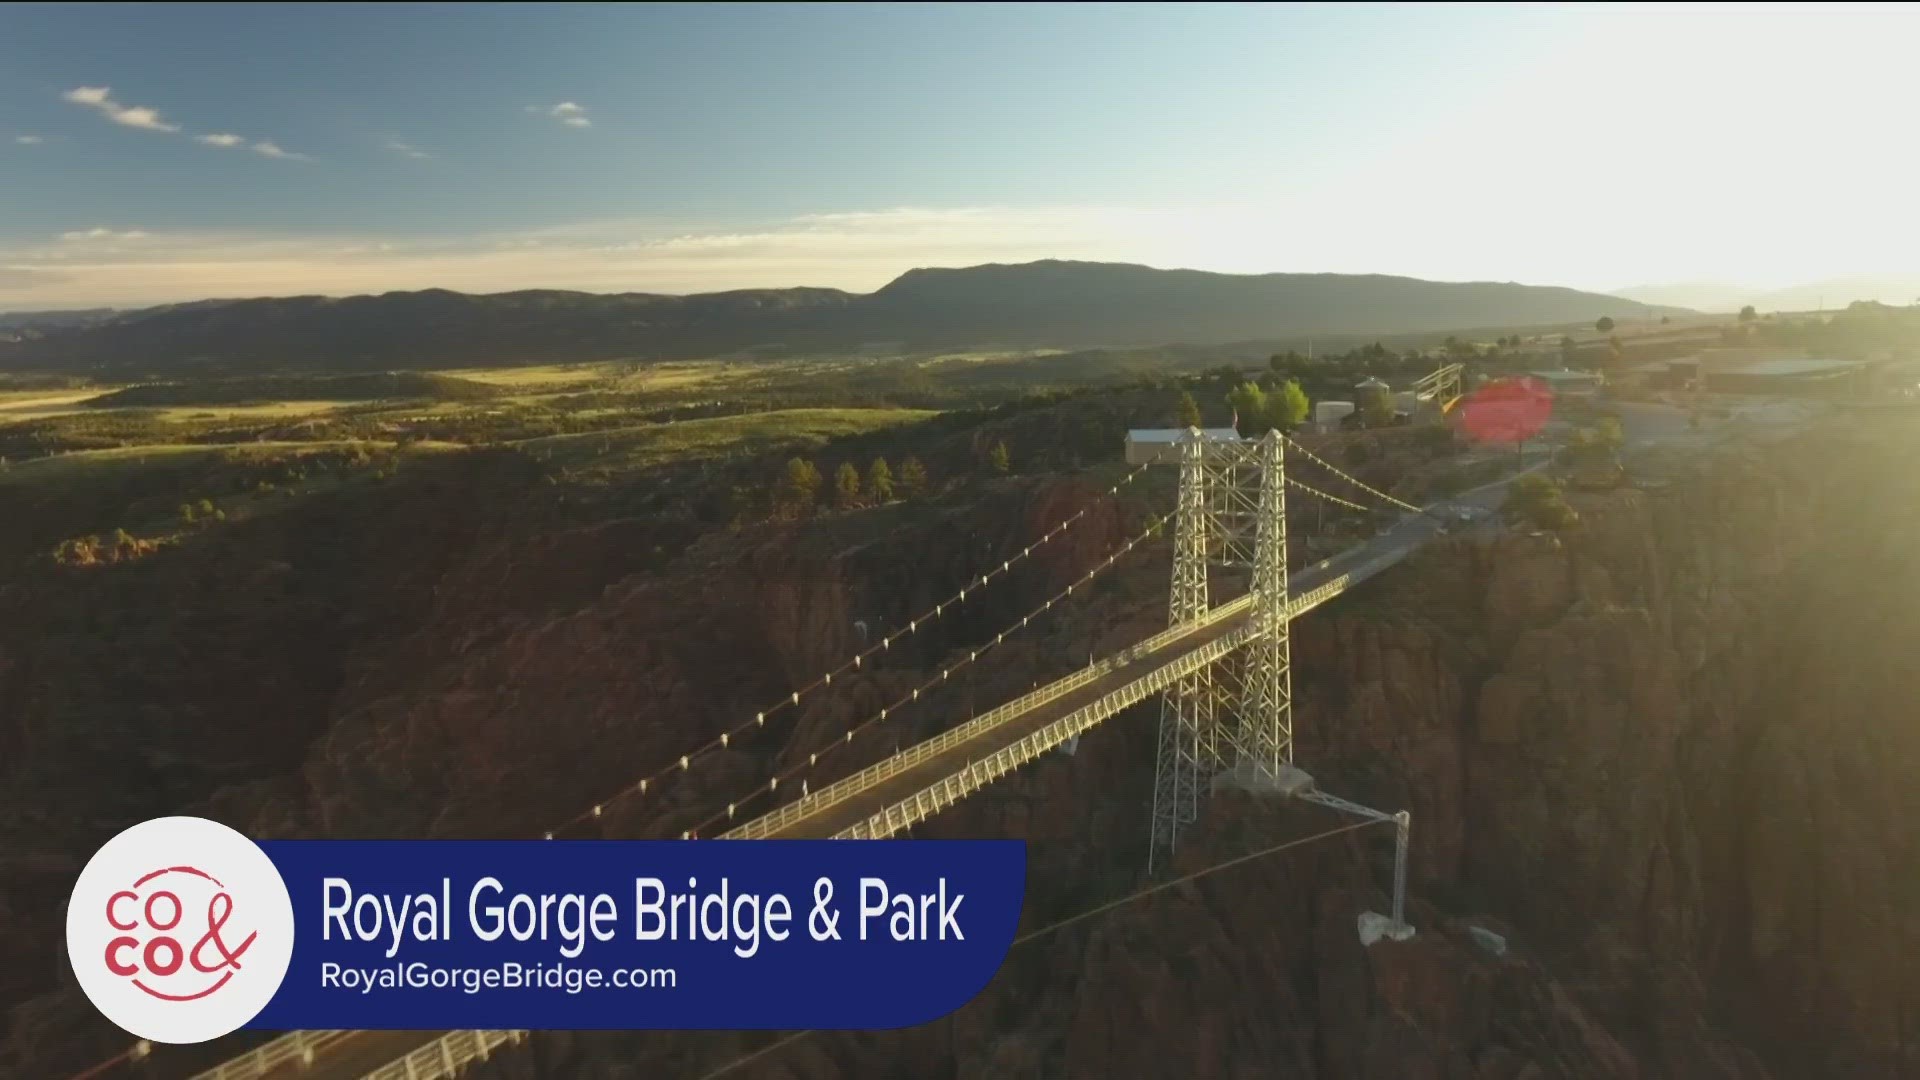 Take a quick road trip to visit Royal Gorge Bridge and Park! So much to see and do. Learn more at RoyalGorgeBridge.com.